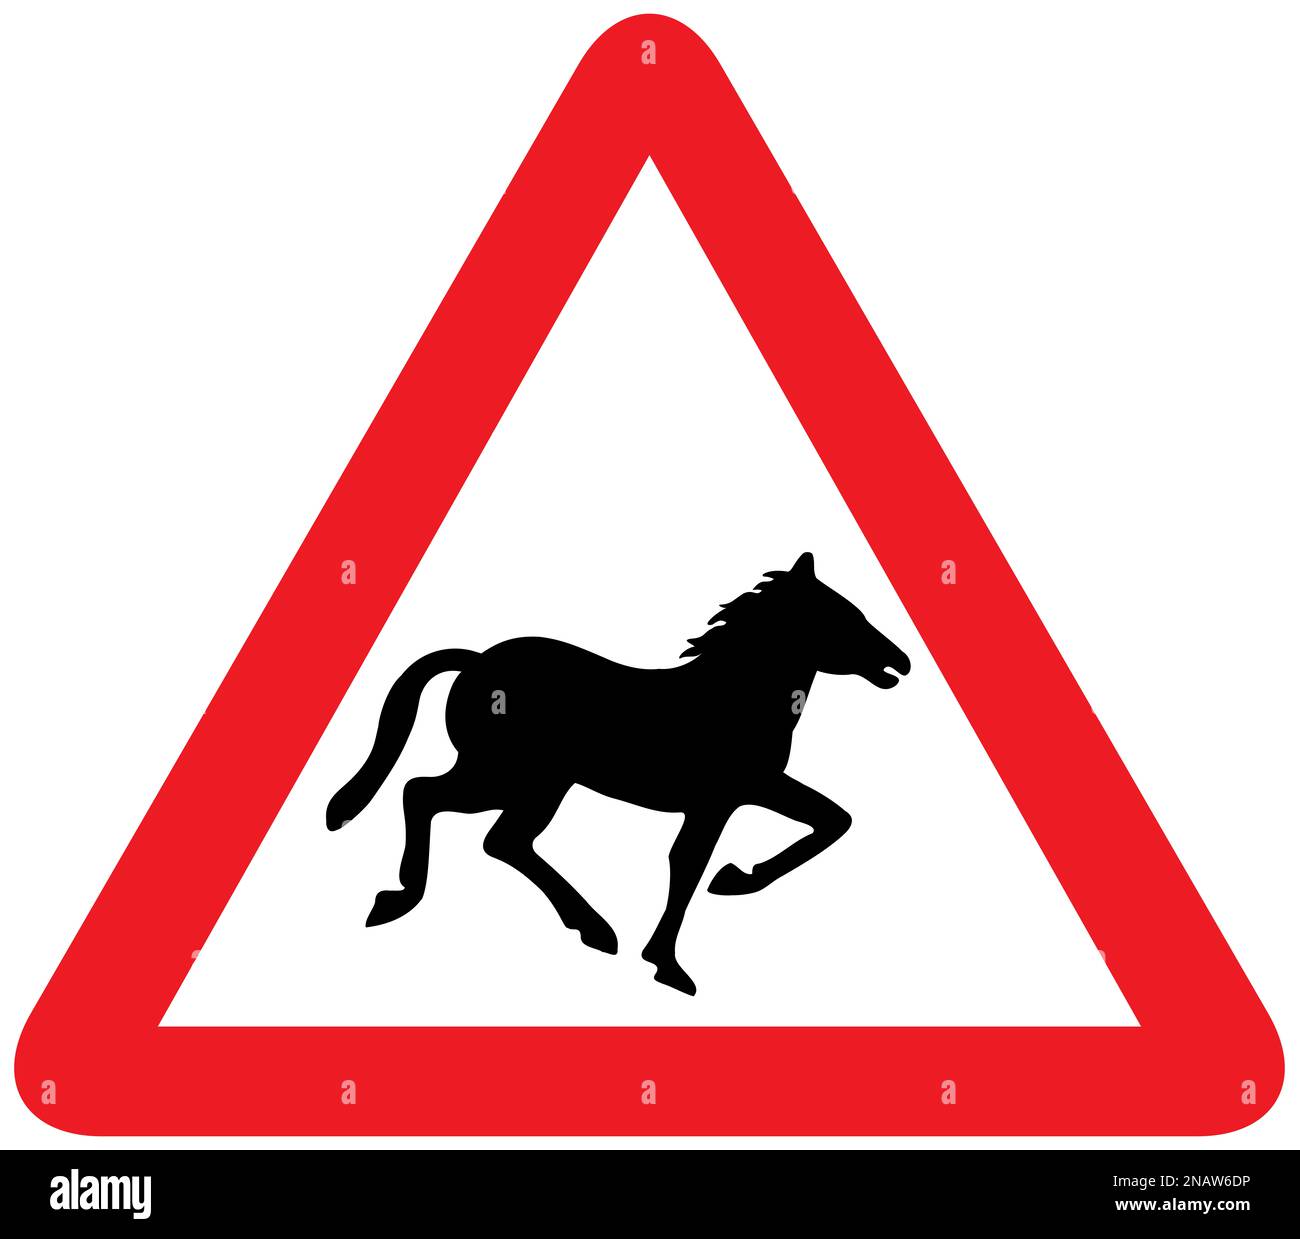 Wild horses or ponies likely to be on the road ahead British road sign Stock Photo